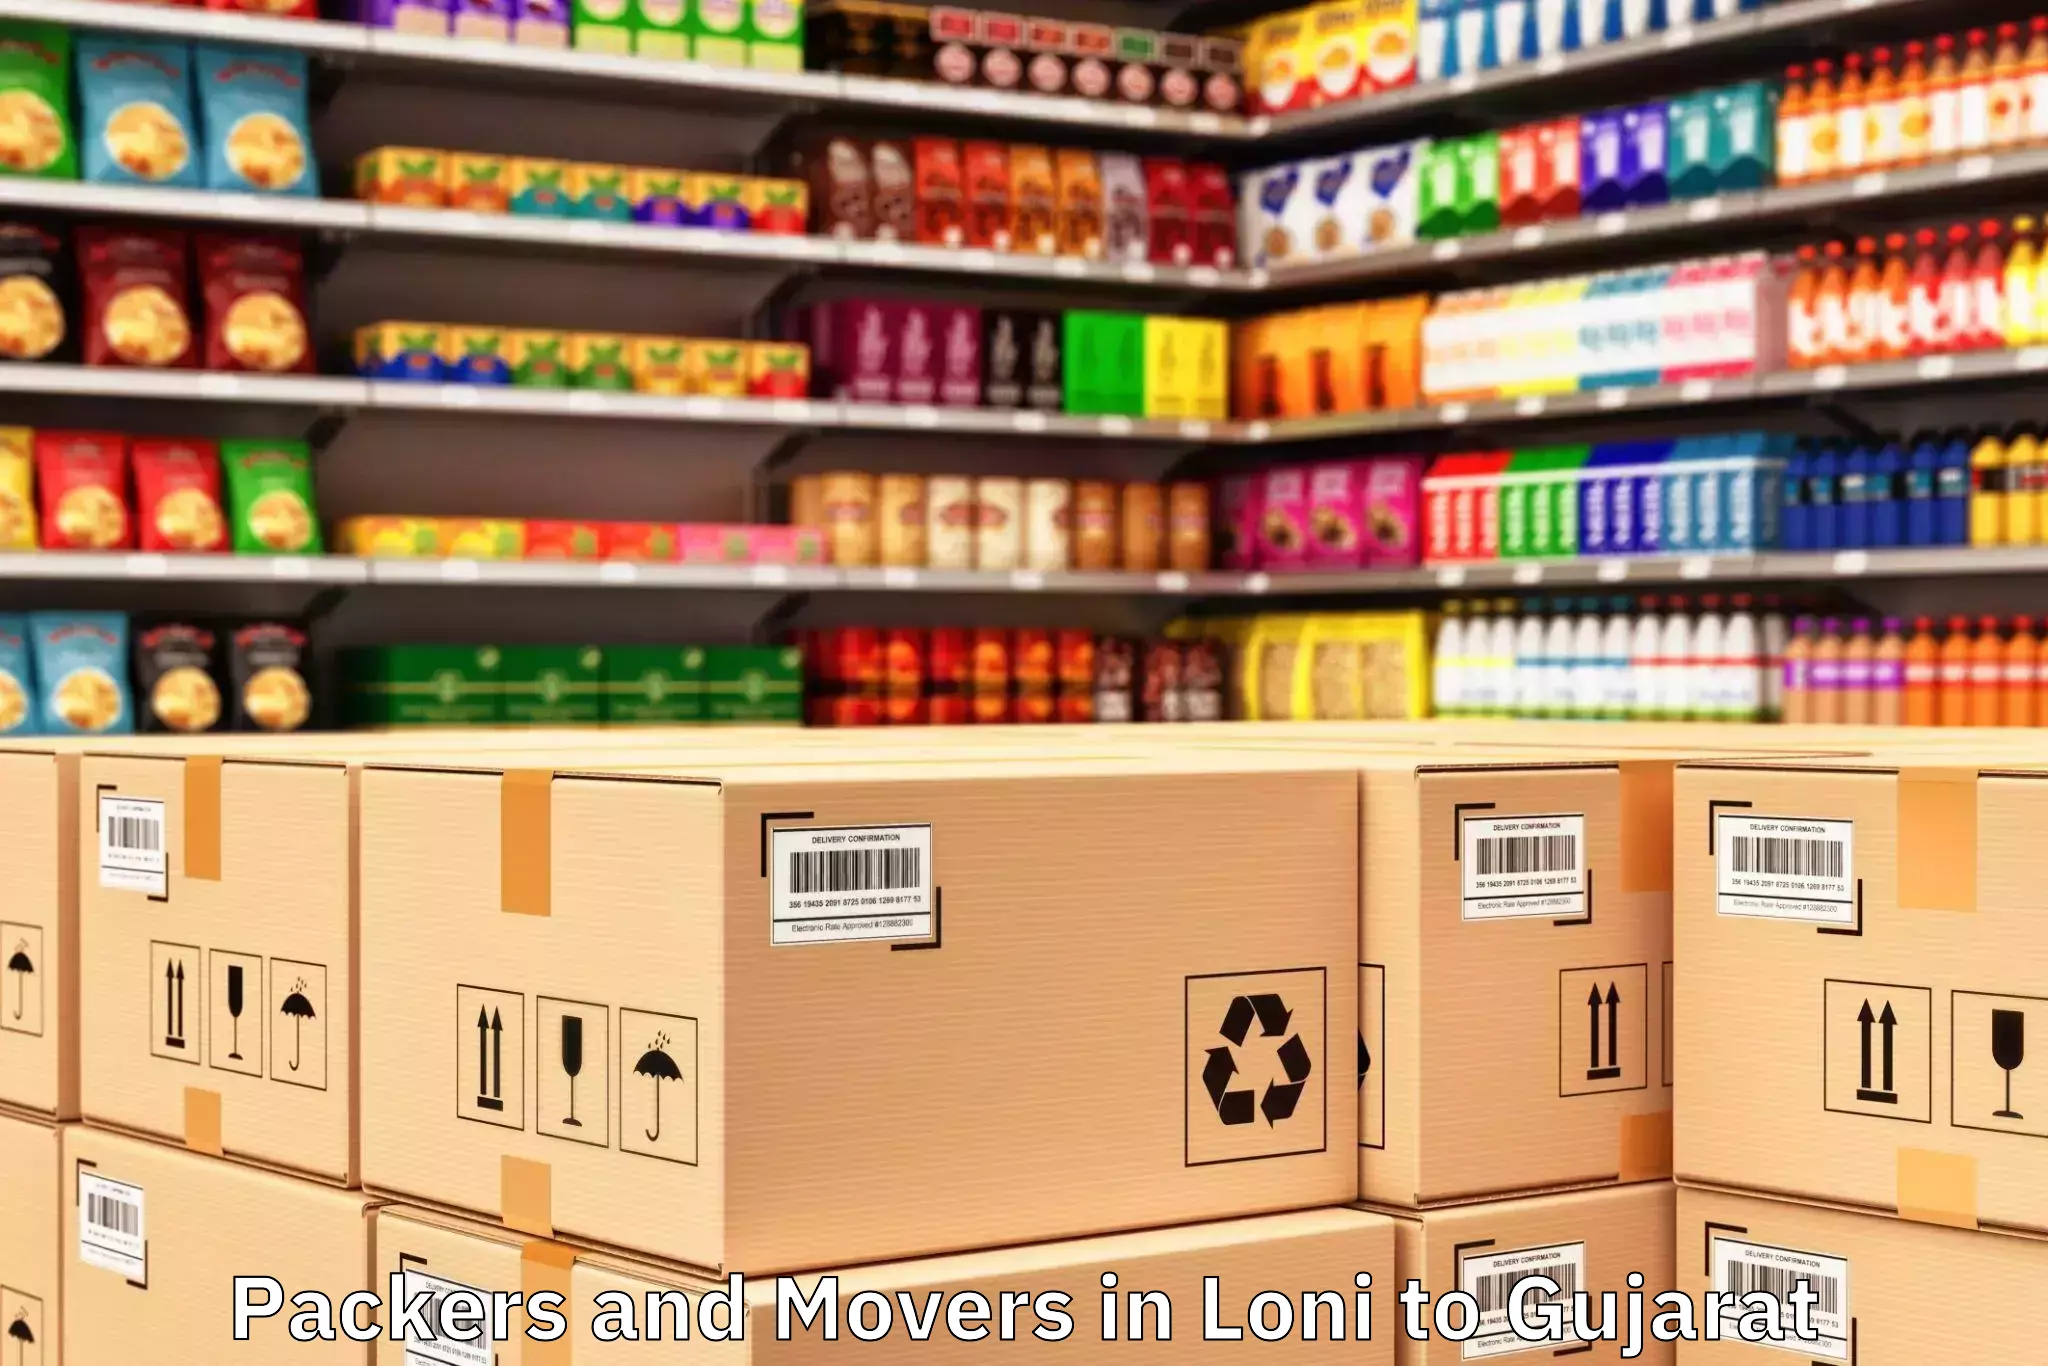 Loni to Rk University Rajkot Packers And Movers